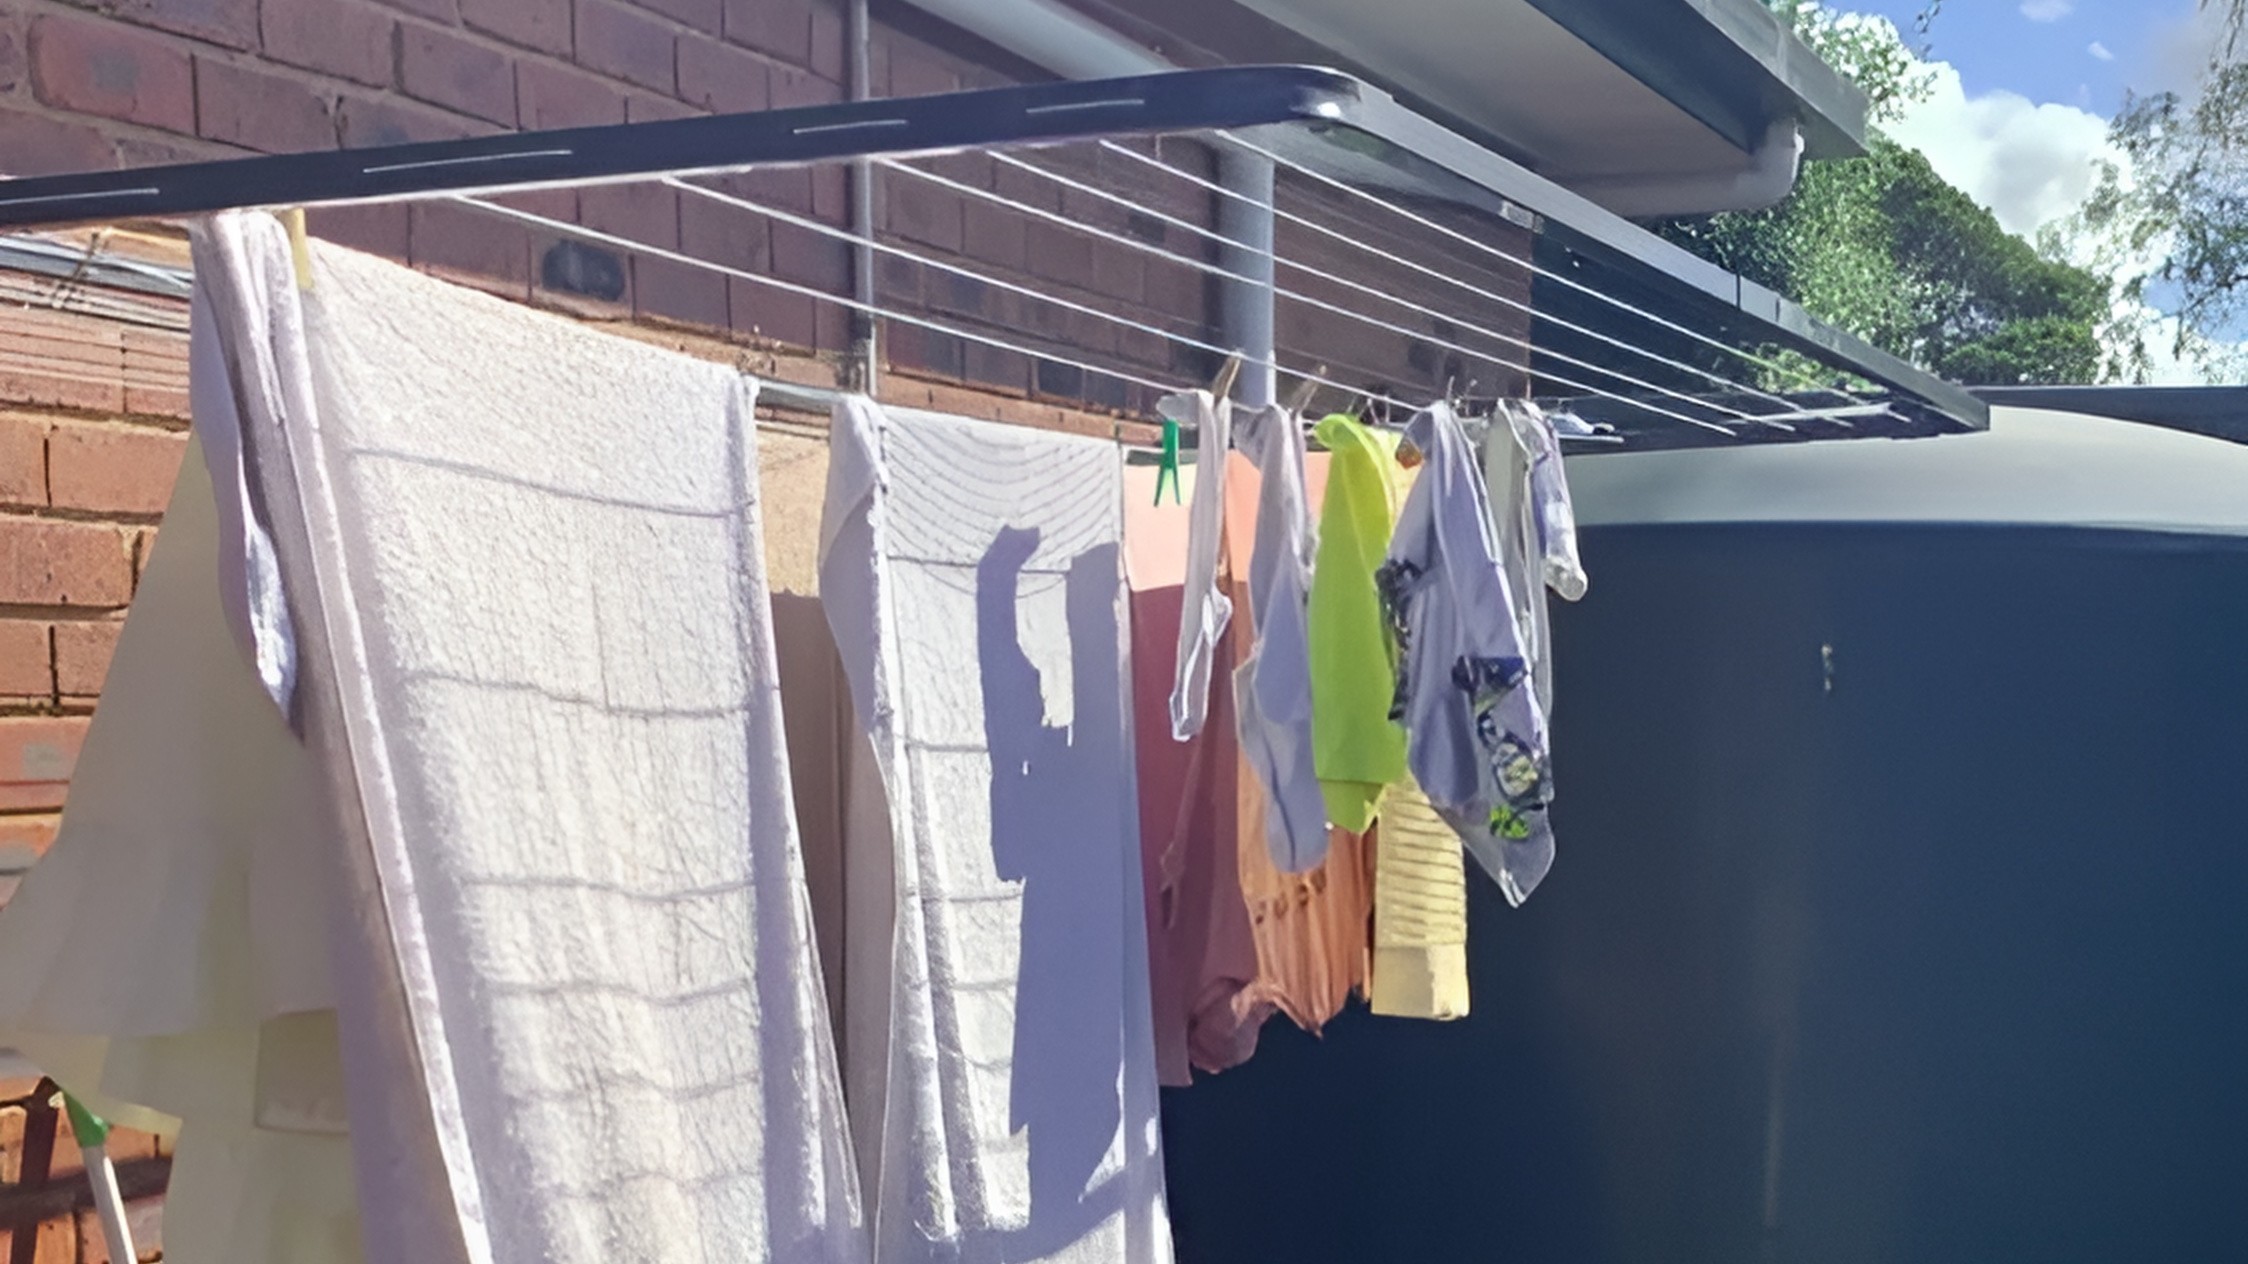 Heavy Duty Wall Mounted Washing Line Sunshine and Savings: Energy-Efficient Drying